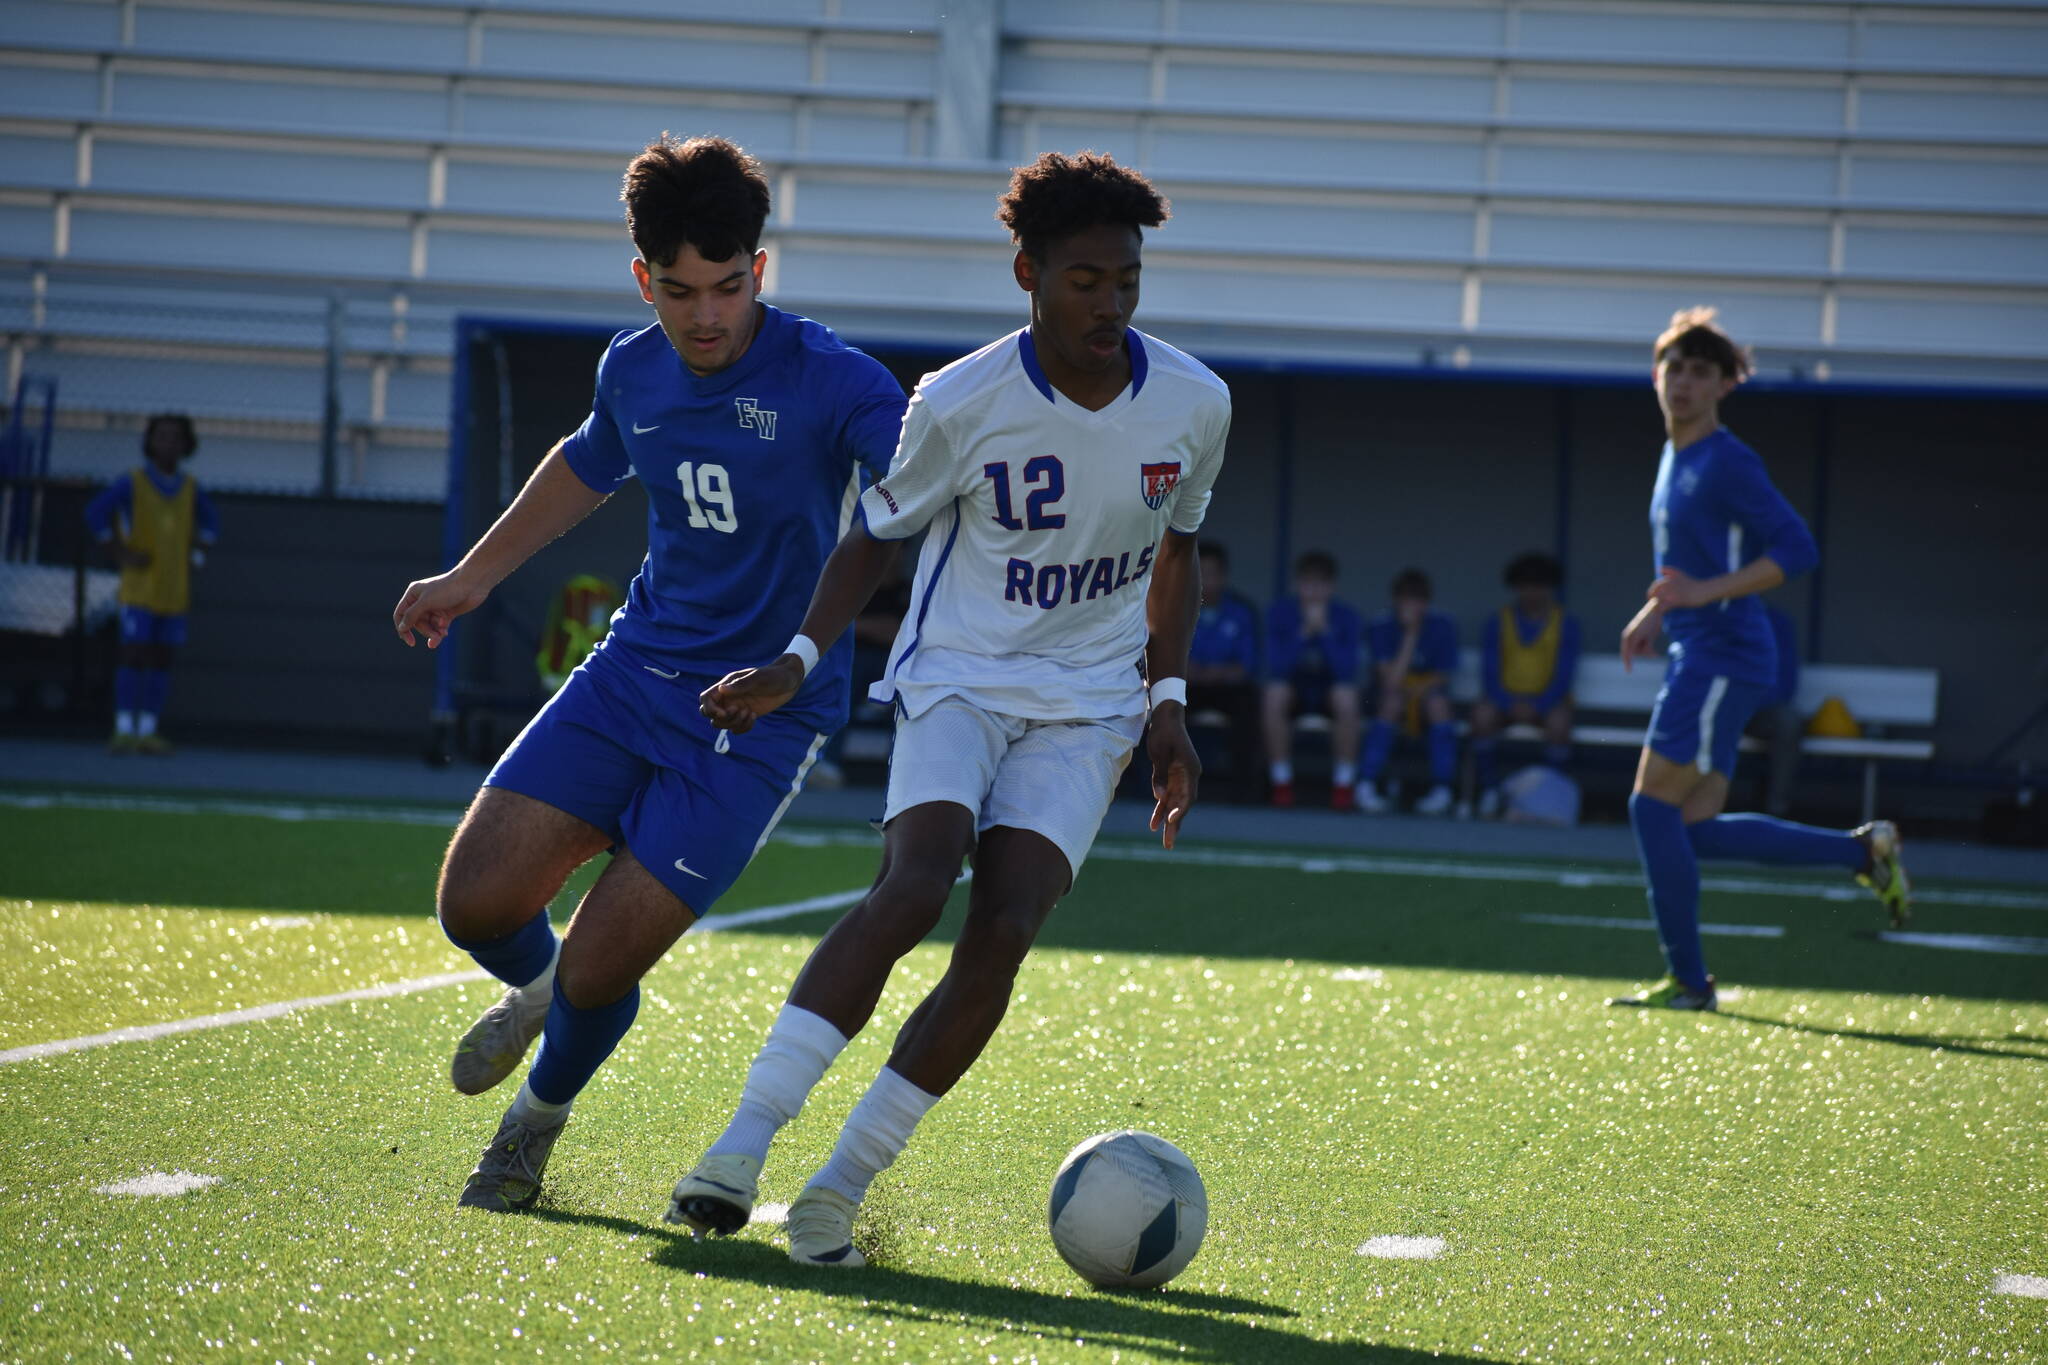 Keilor Cacho-Garcia possesses the ball in the first half against the Eagles. Ben Ray / The Reporter